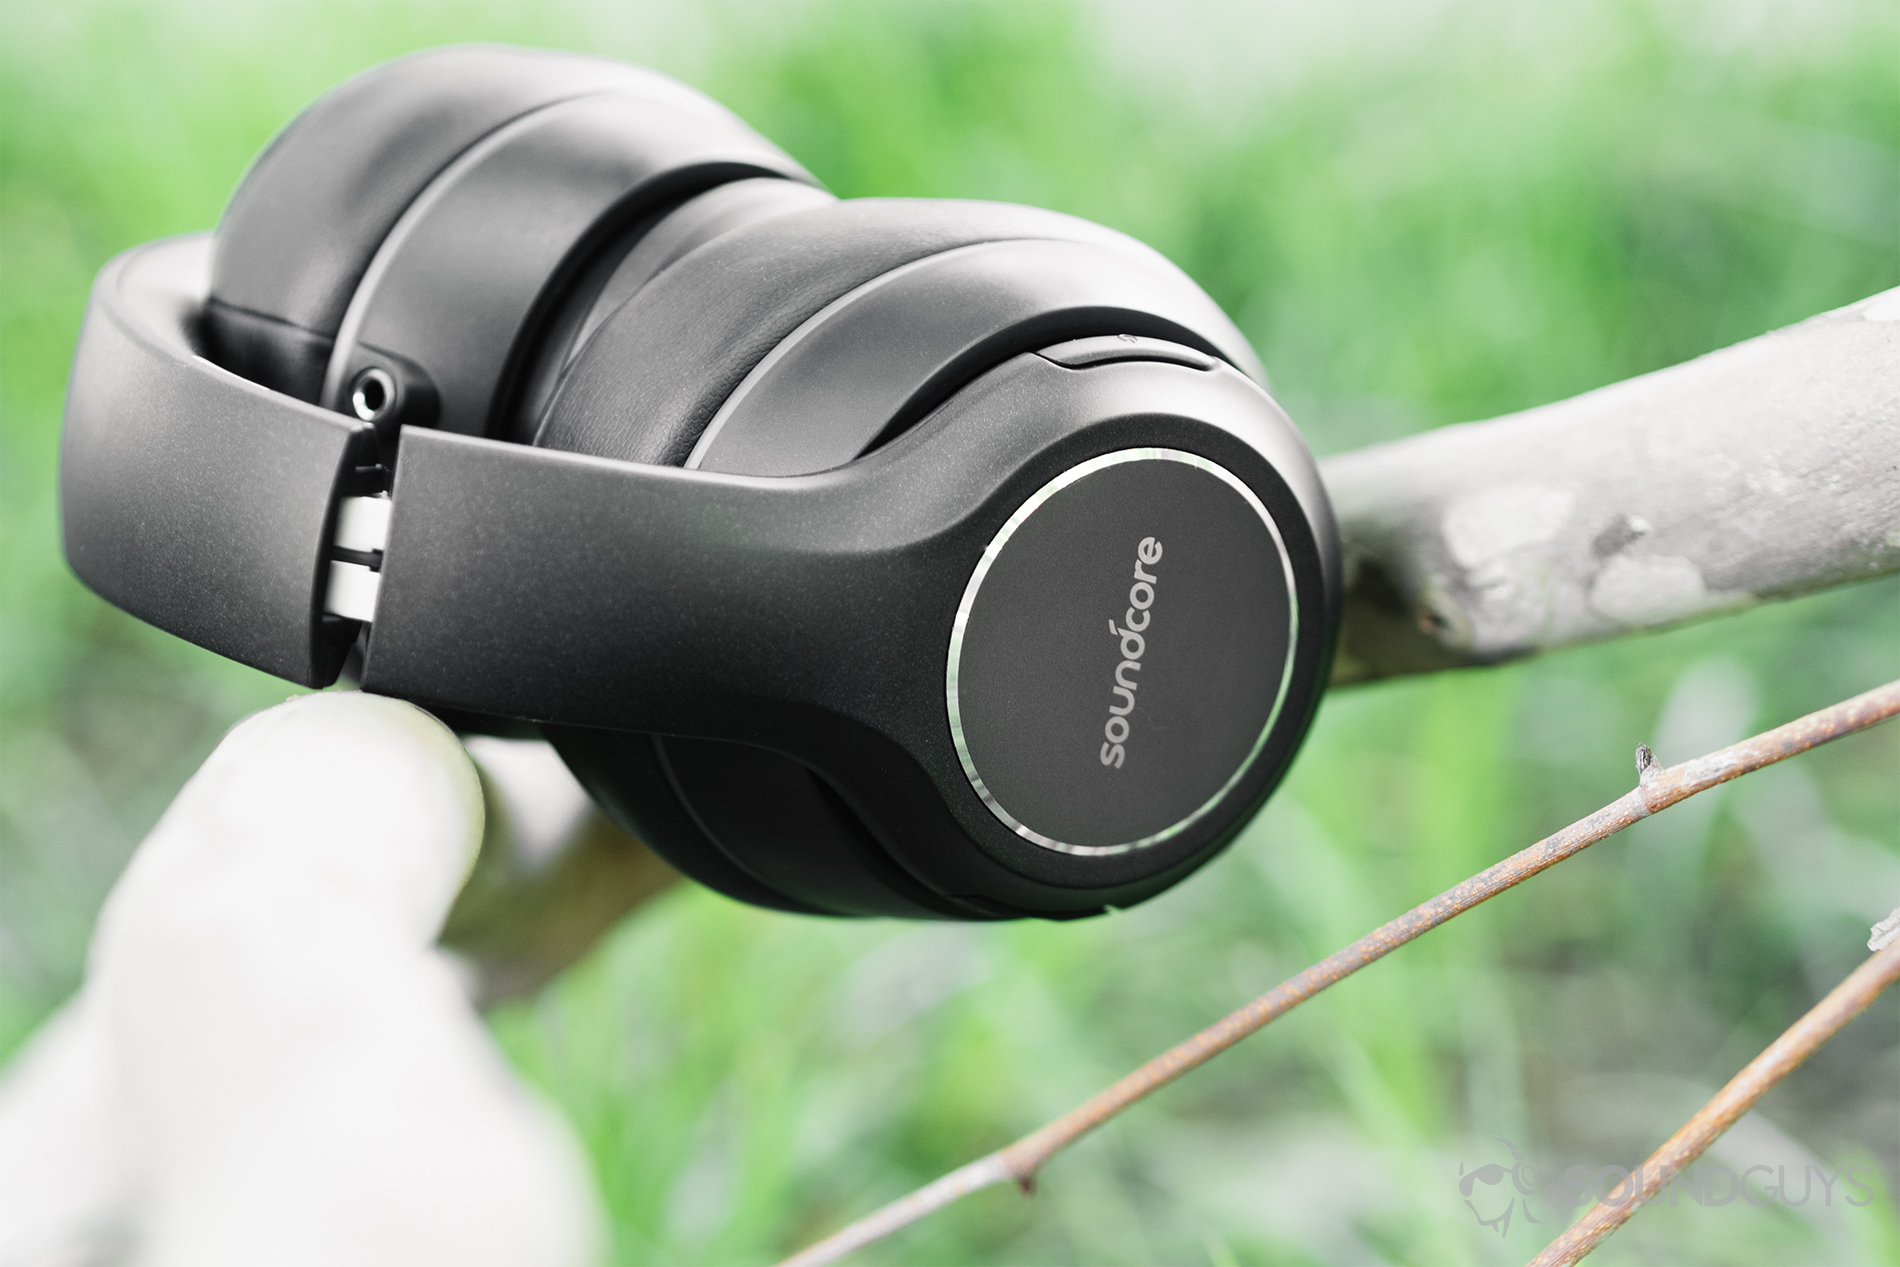 Anker Soundcore Vortex review: The headphones folded and resting between a V-shaped branch.